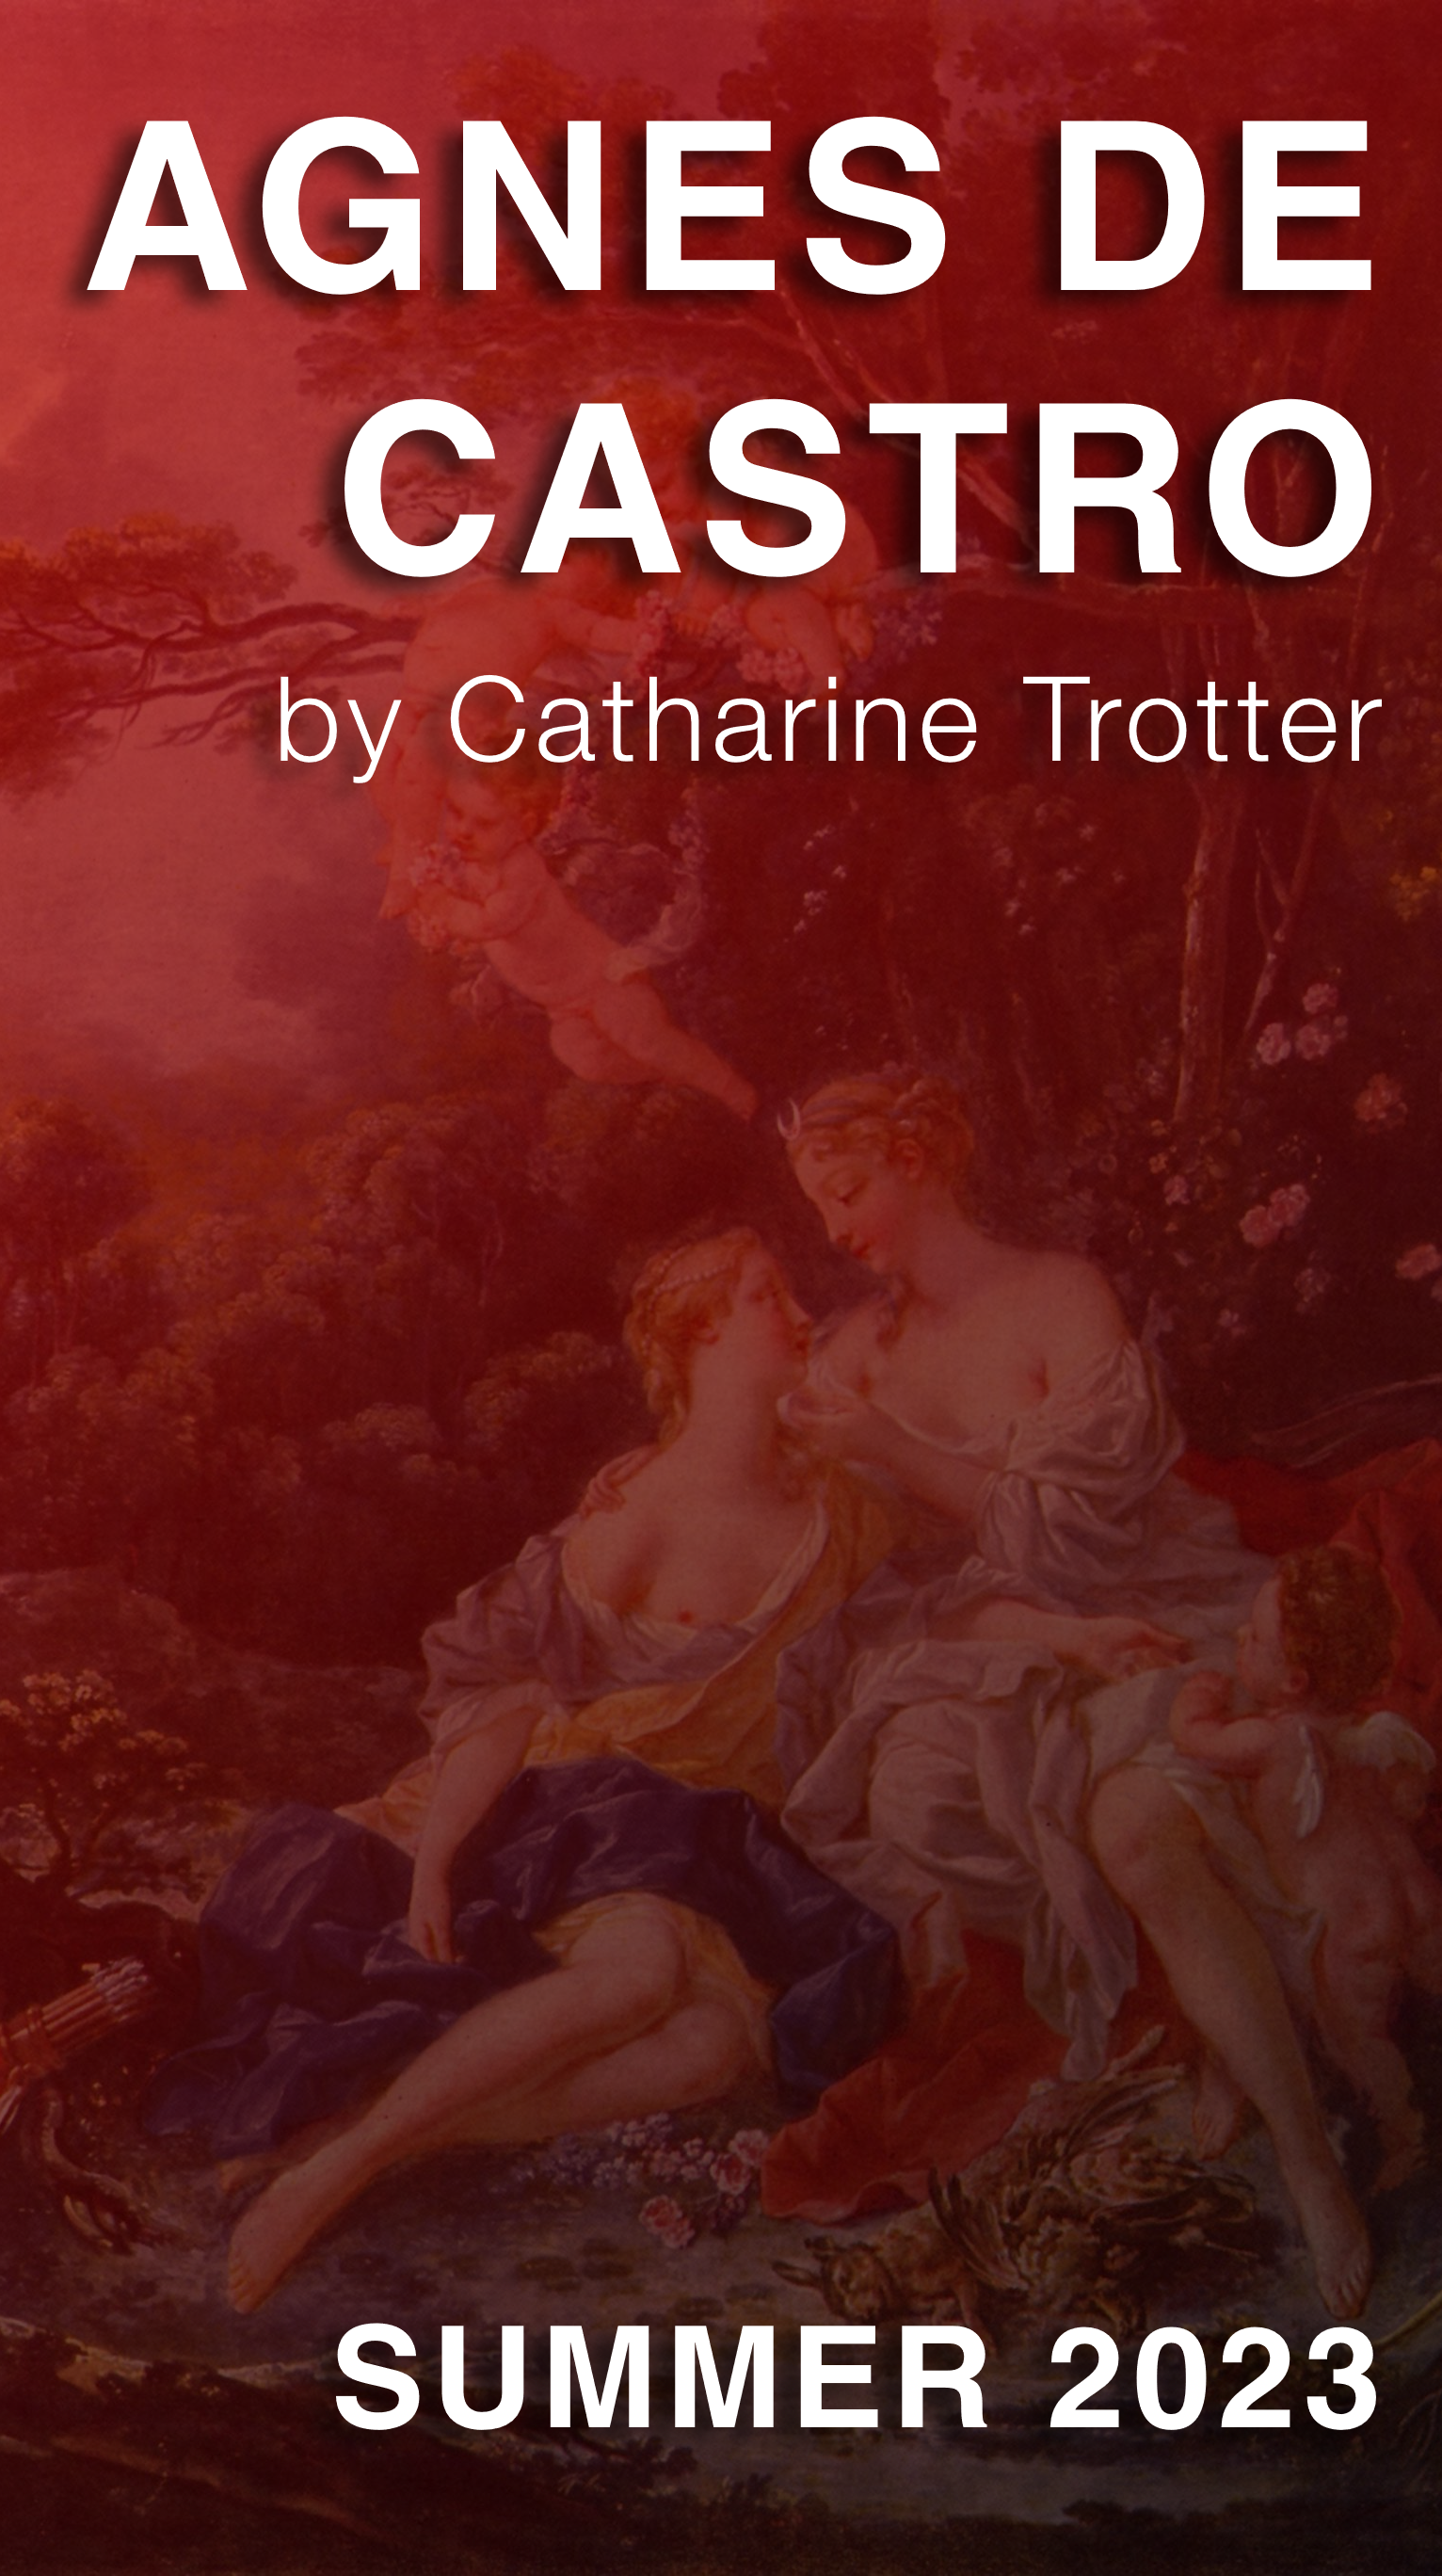 Agnes de Castro by Catharine Trotter teaser image